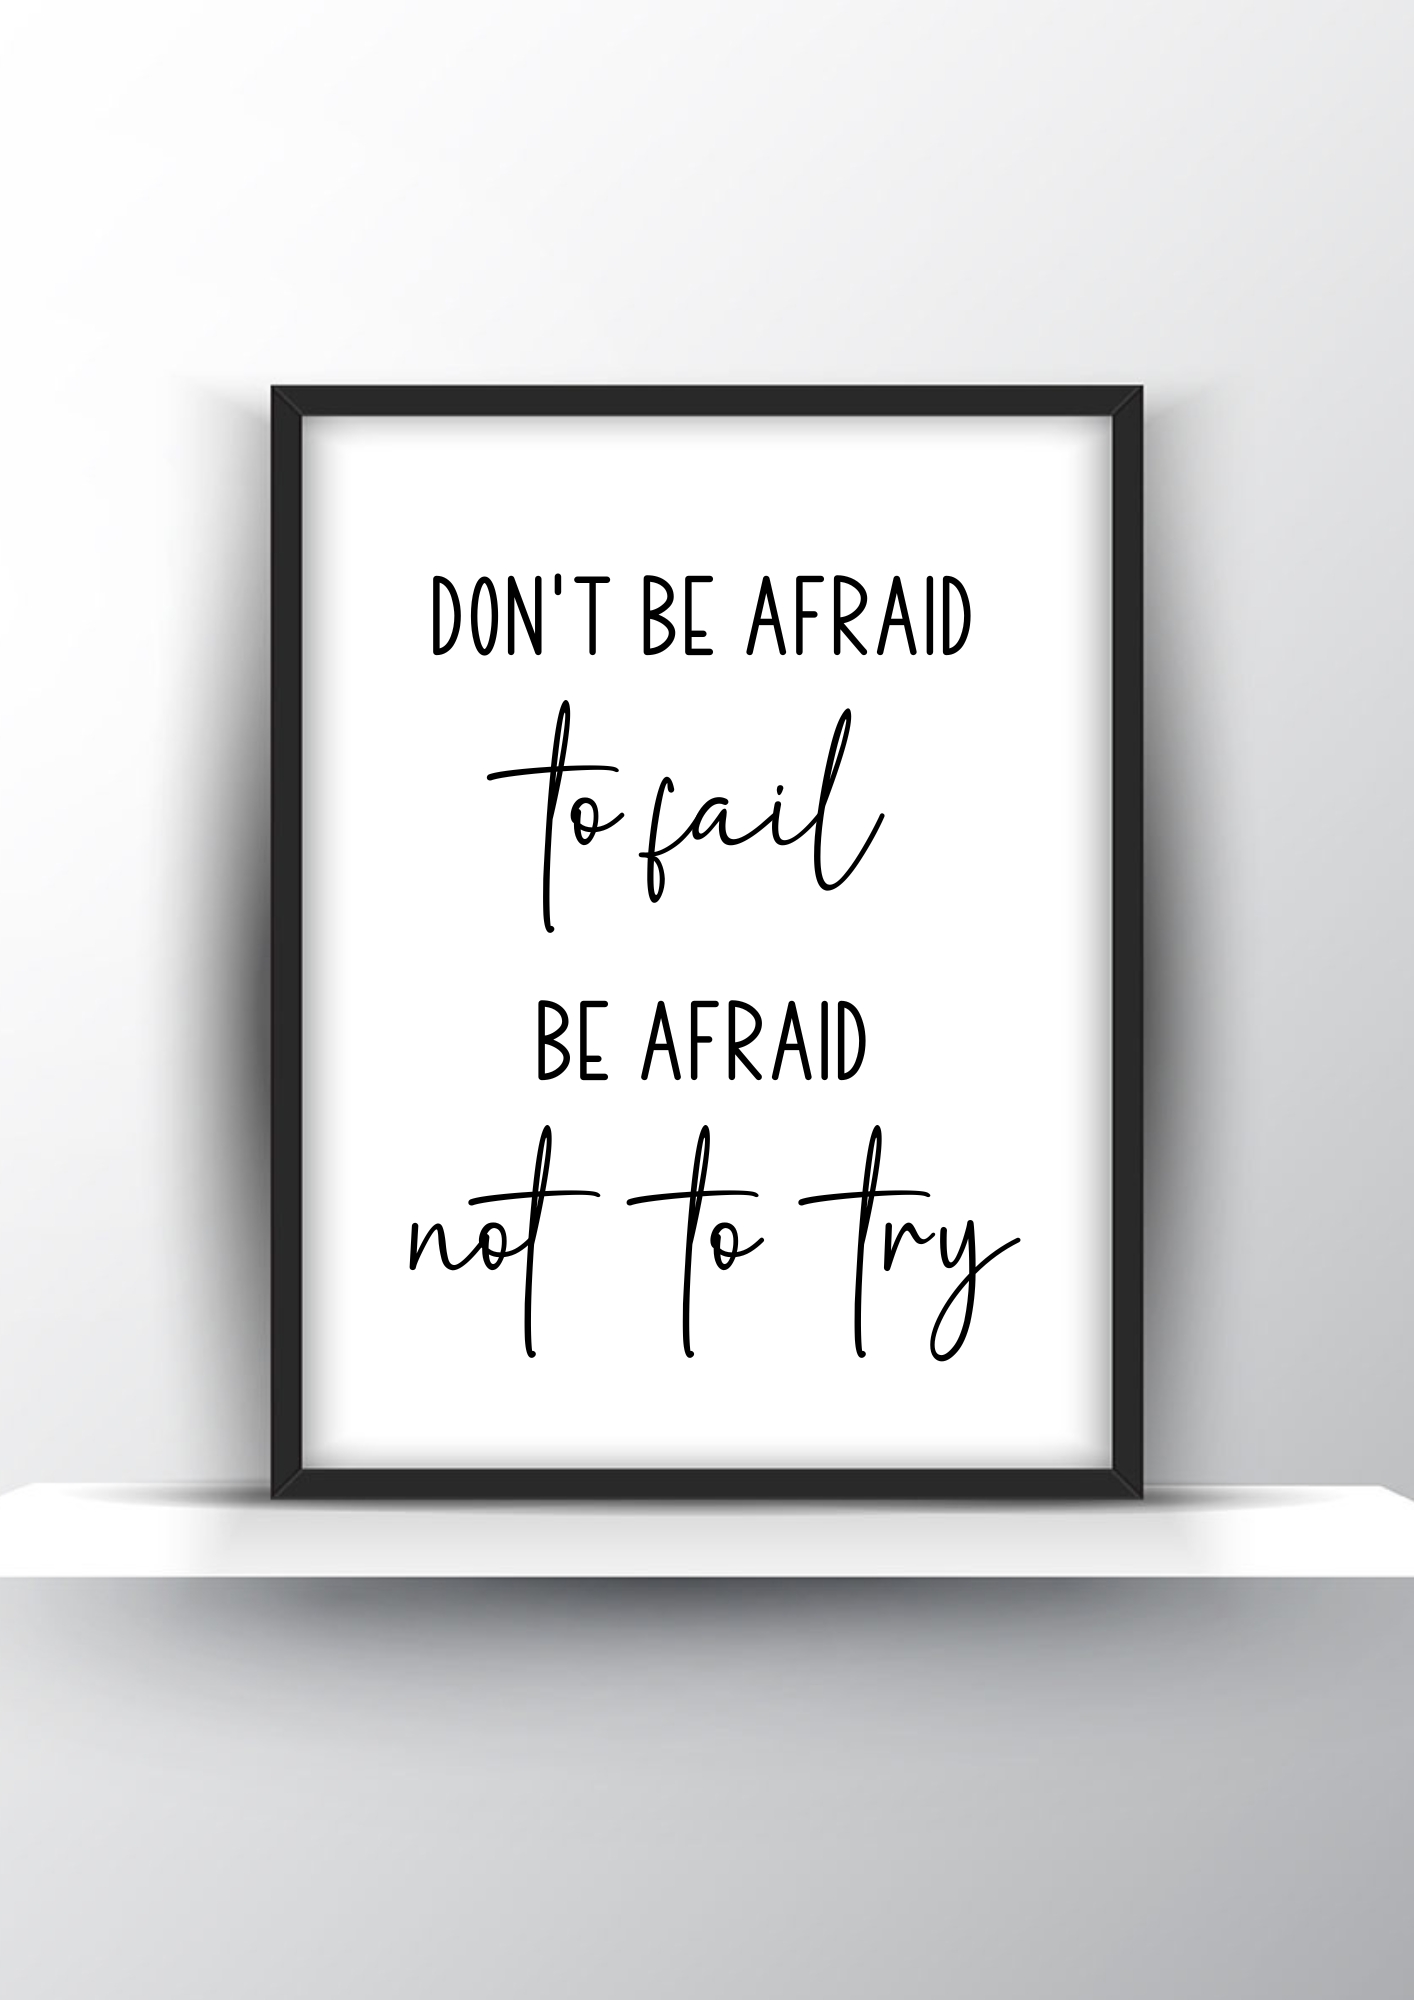 Don't Be Afraid To Fail Be Afraid Not To Try Printable Wall Art - Motivational Wall Art - Home Decor - Digital Download